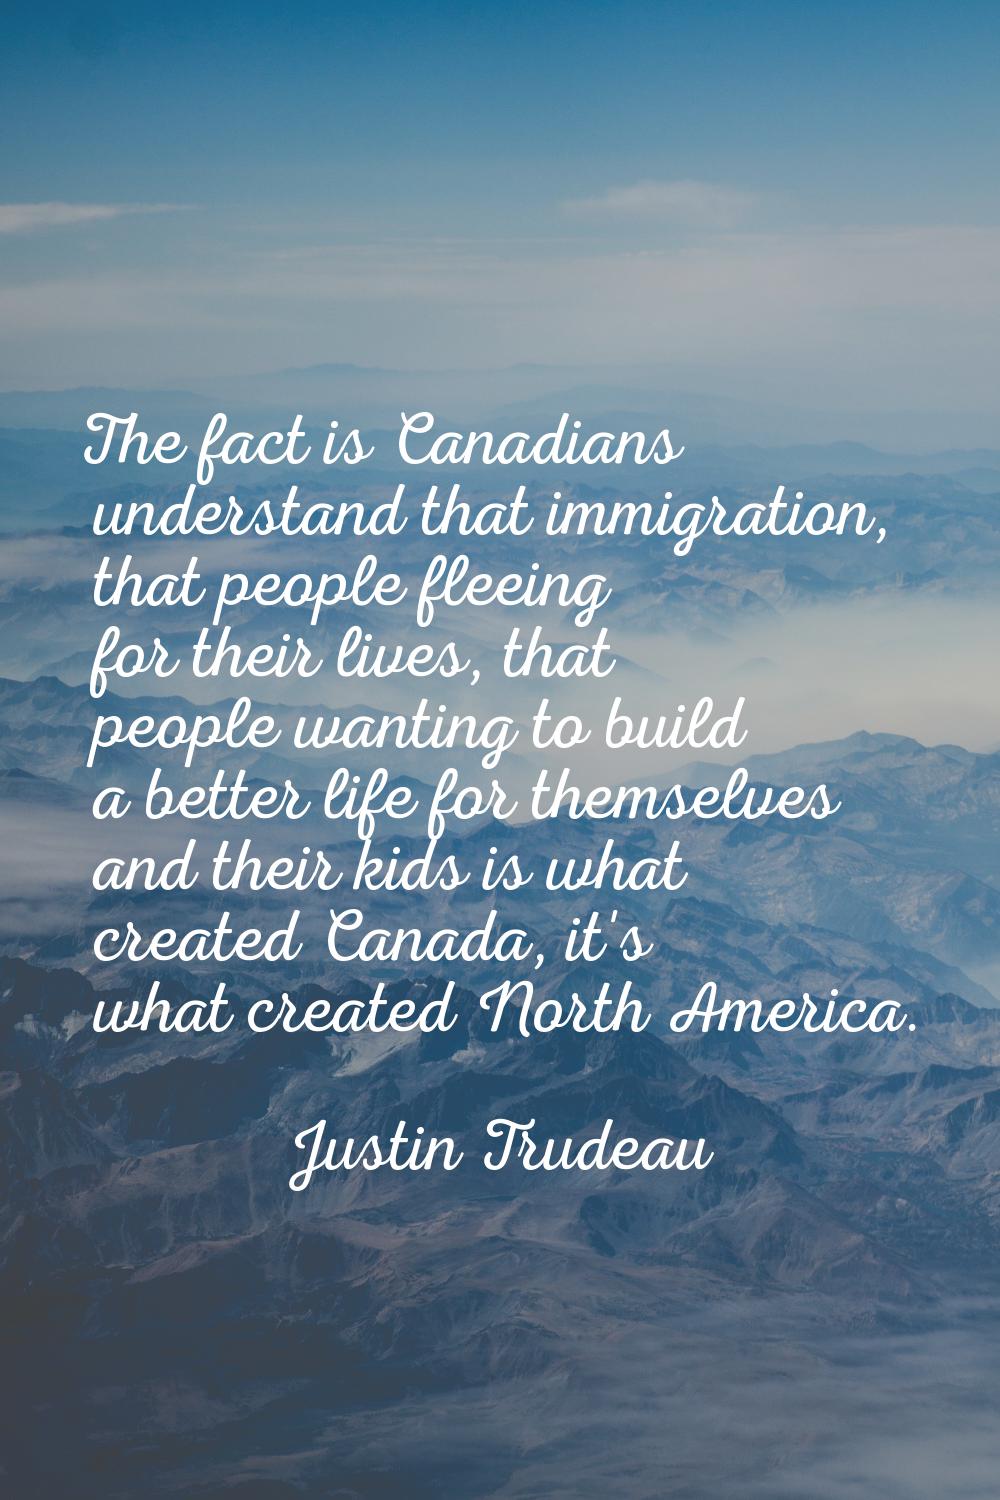 The fact is Canadians understand that immigration, that people fleeing for their lives, that people